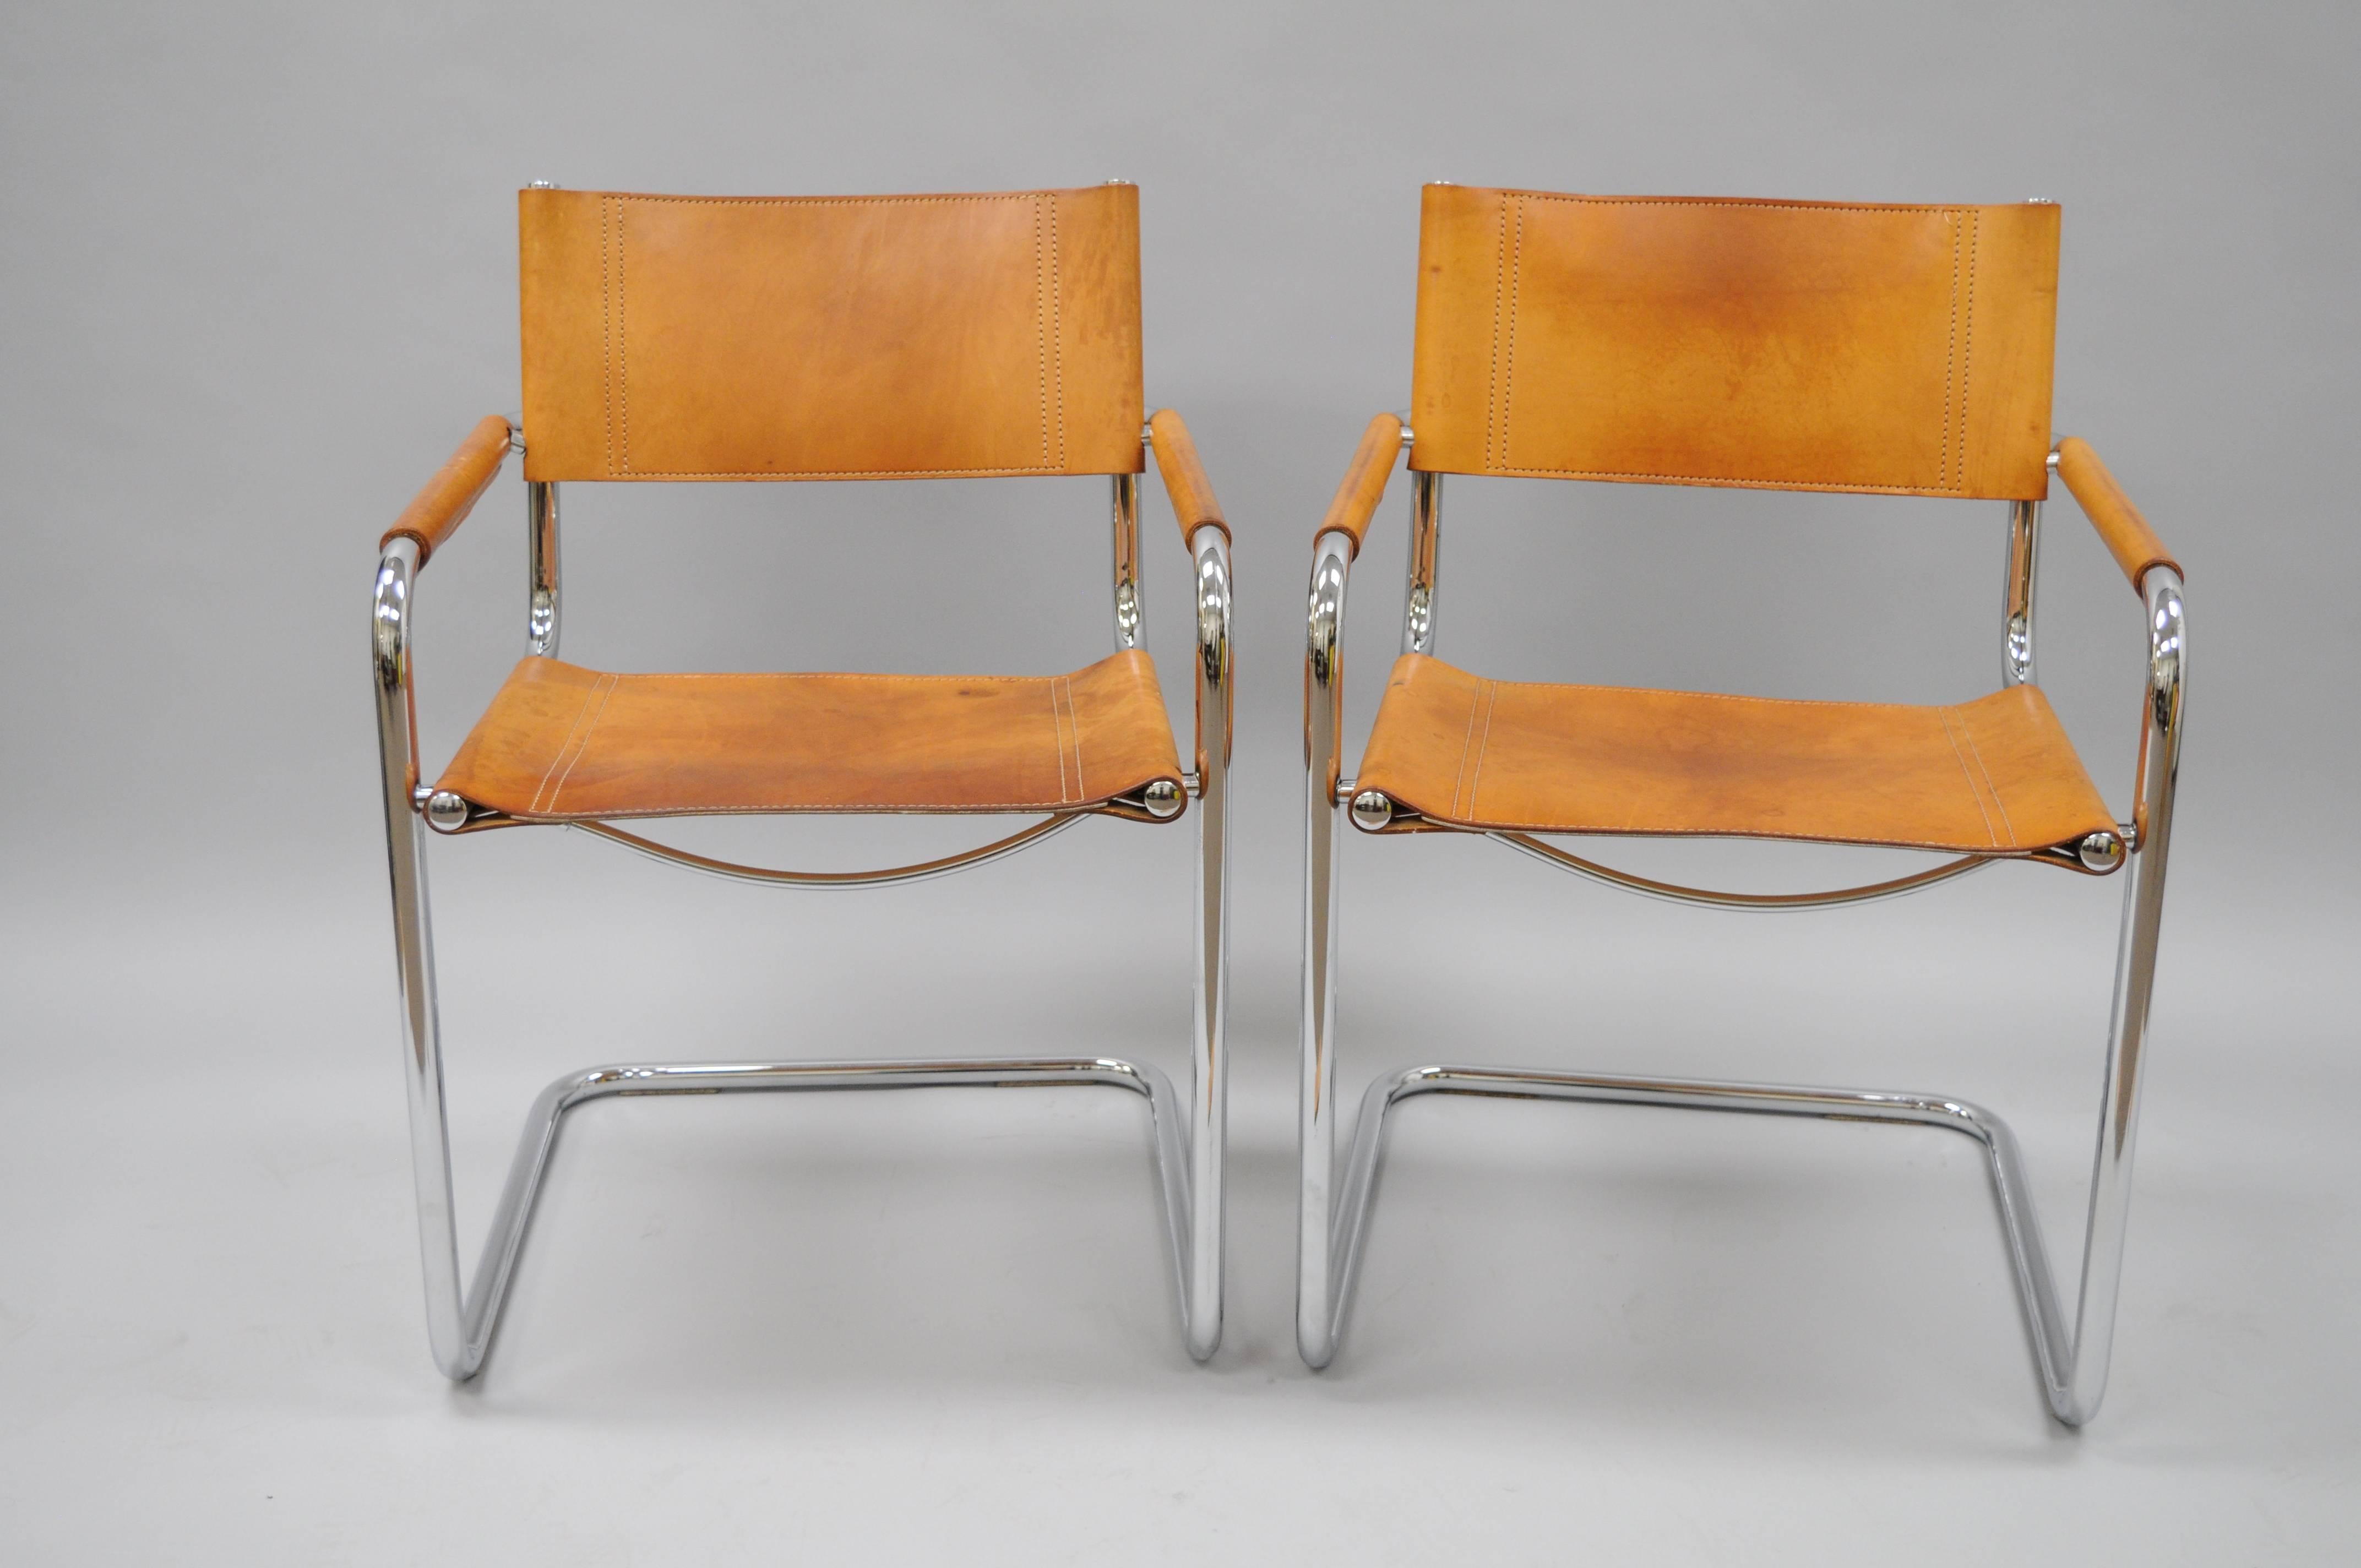 Pair of vintage Mid-Century Italian Modern Cognac Leather S34 Dining Armchairs attributed Mart Stam for Fasem. Chairs feature polished tubular chrome frames, beautiful hand-stitched cognac brown leather with desirable and authentic patina to